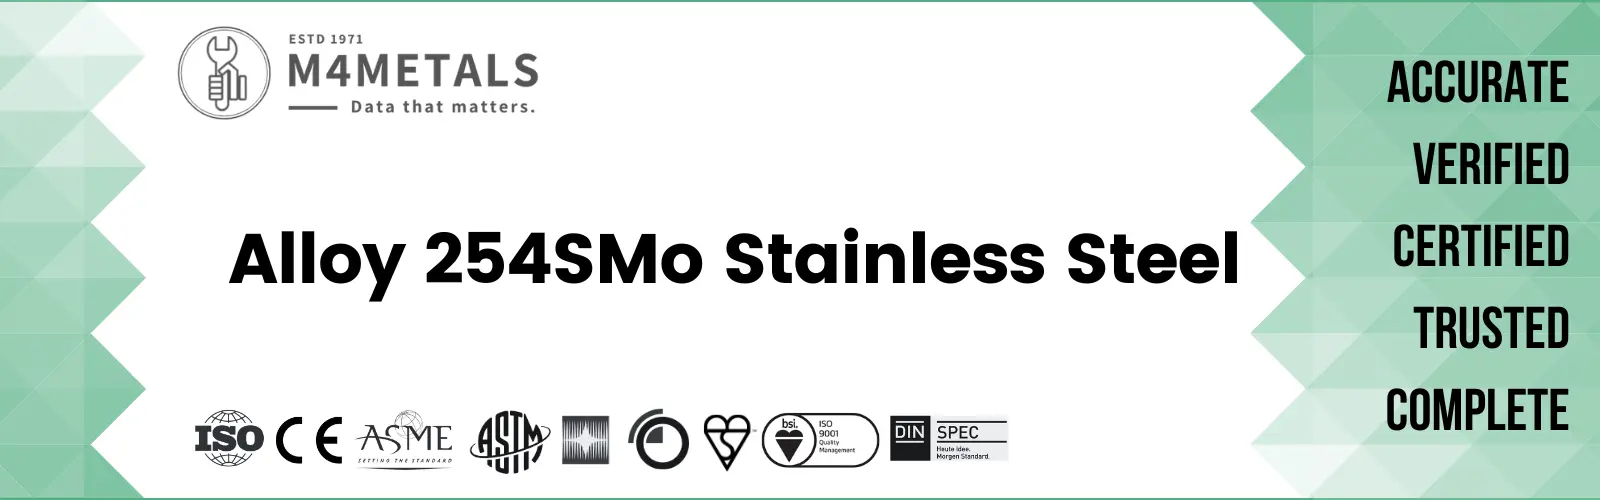 Alloy 254SMo Stainless Steel